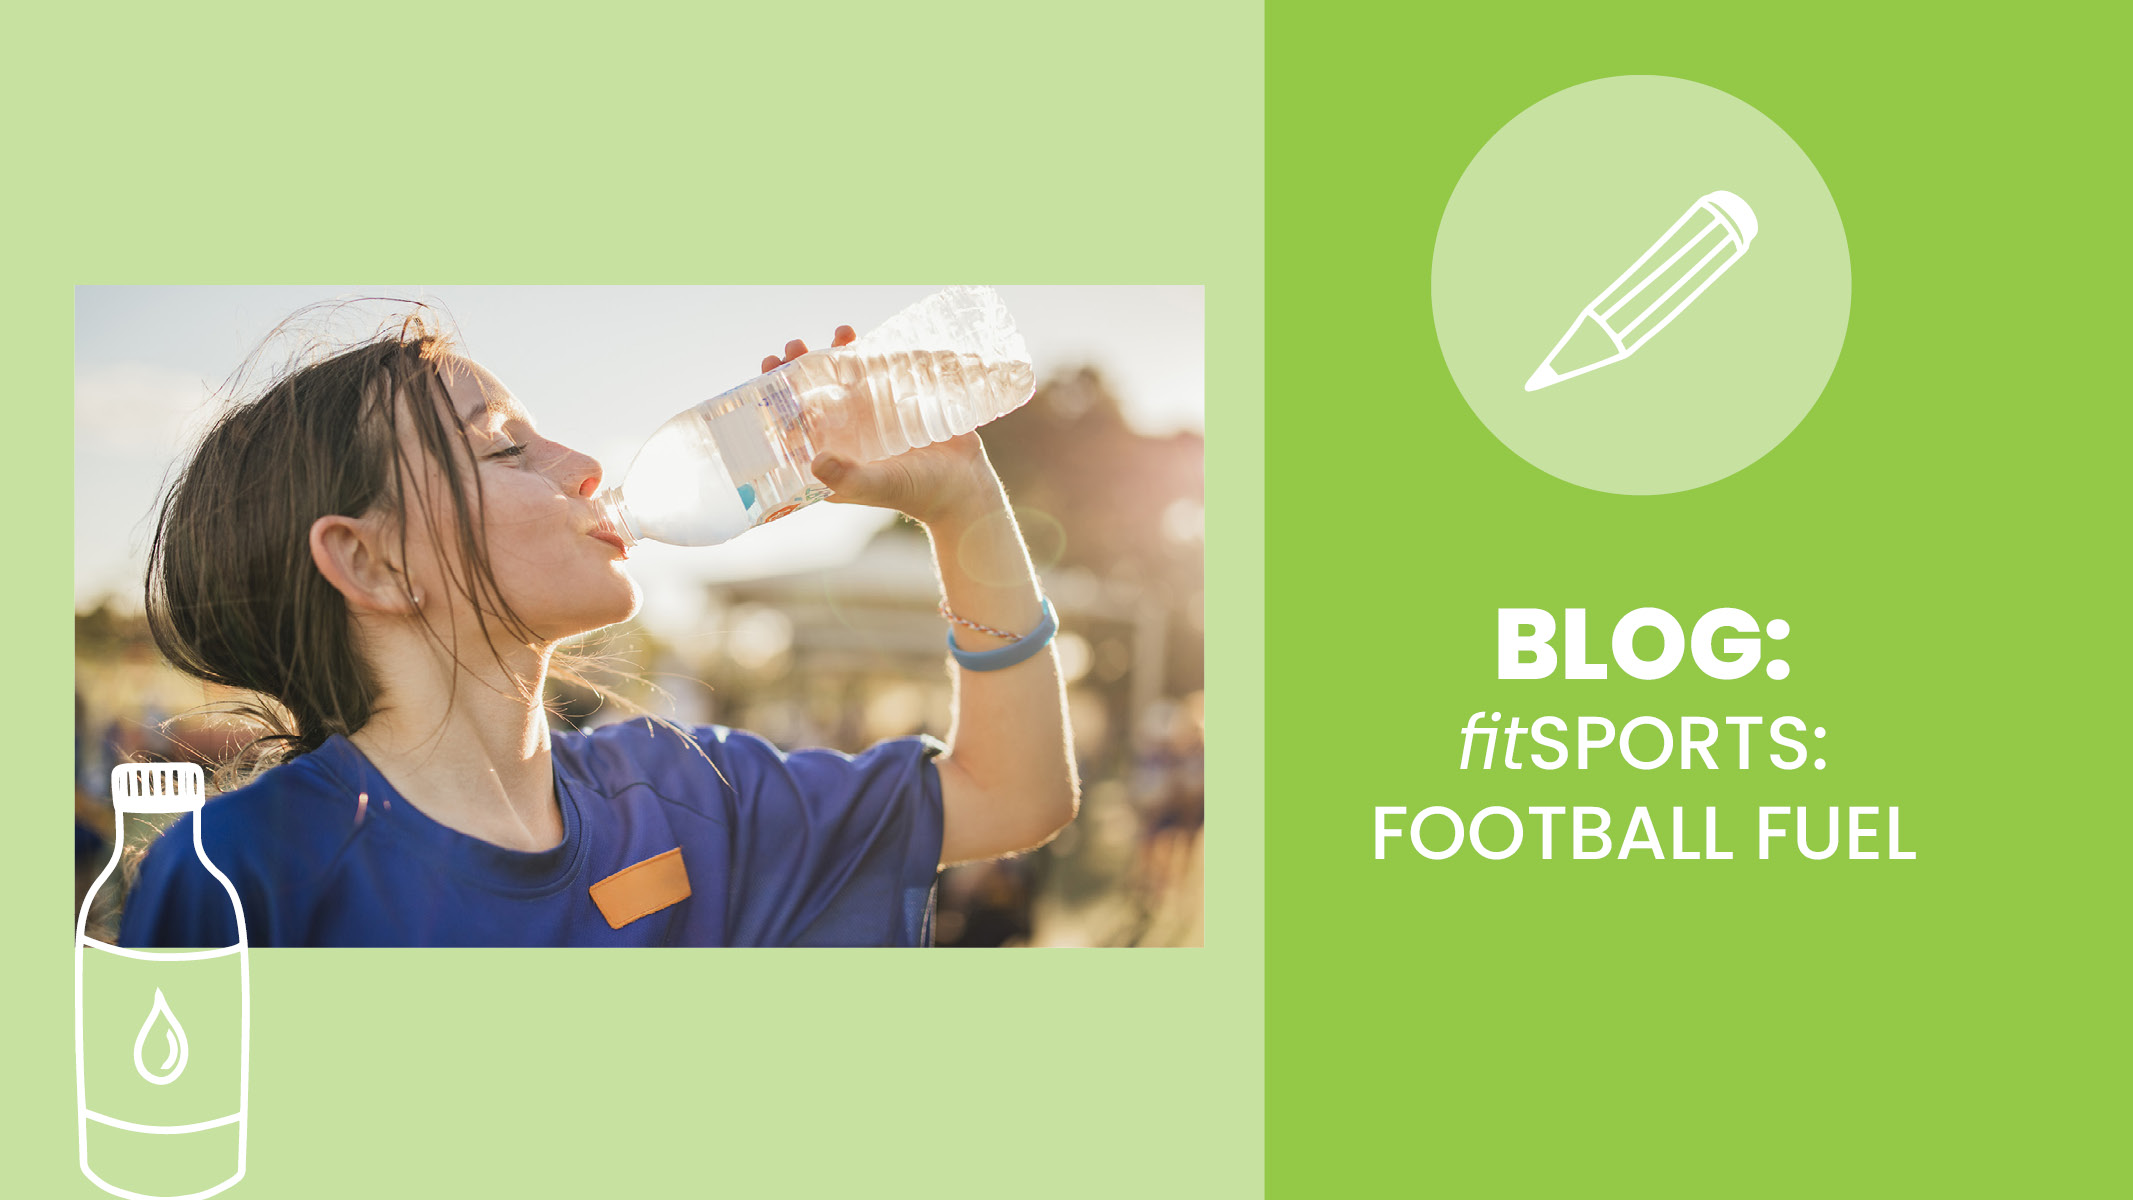 Young child, girl, drinks water during a football game